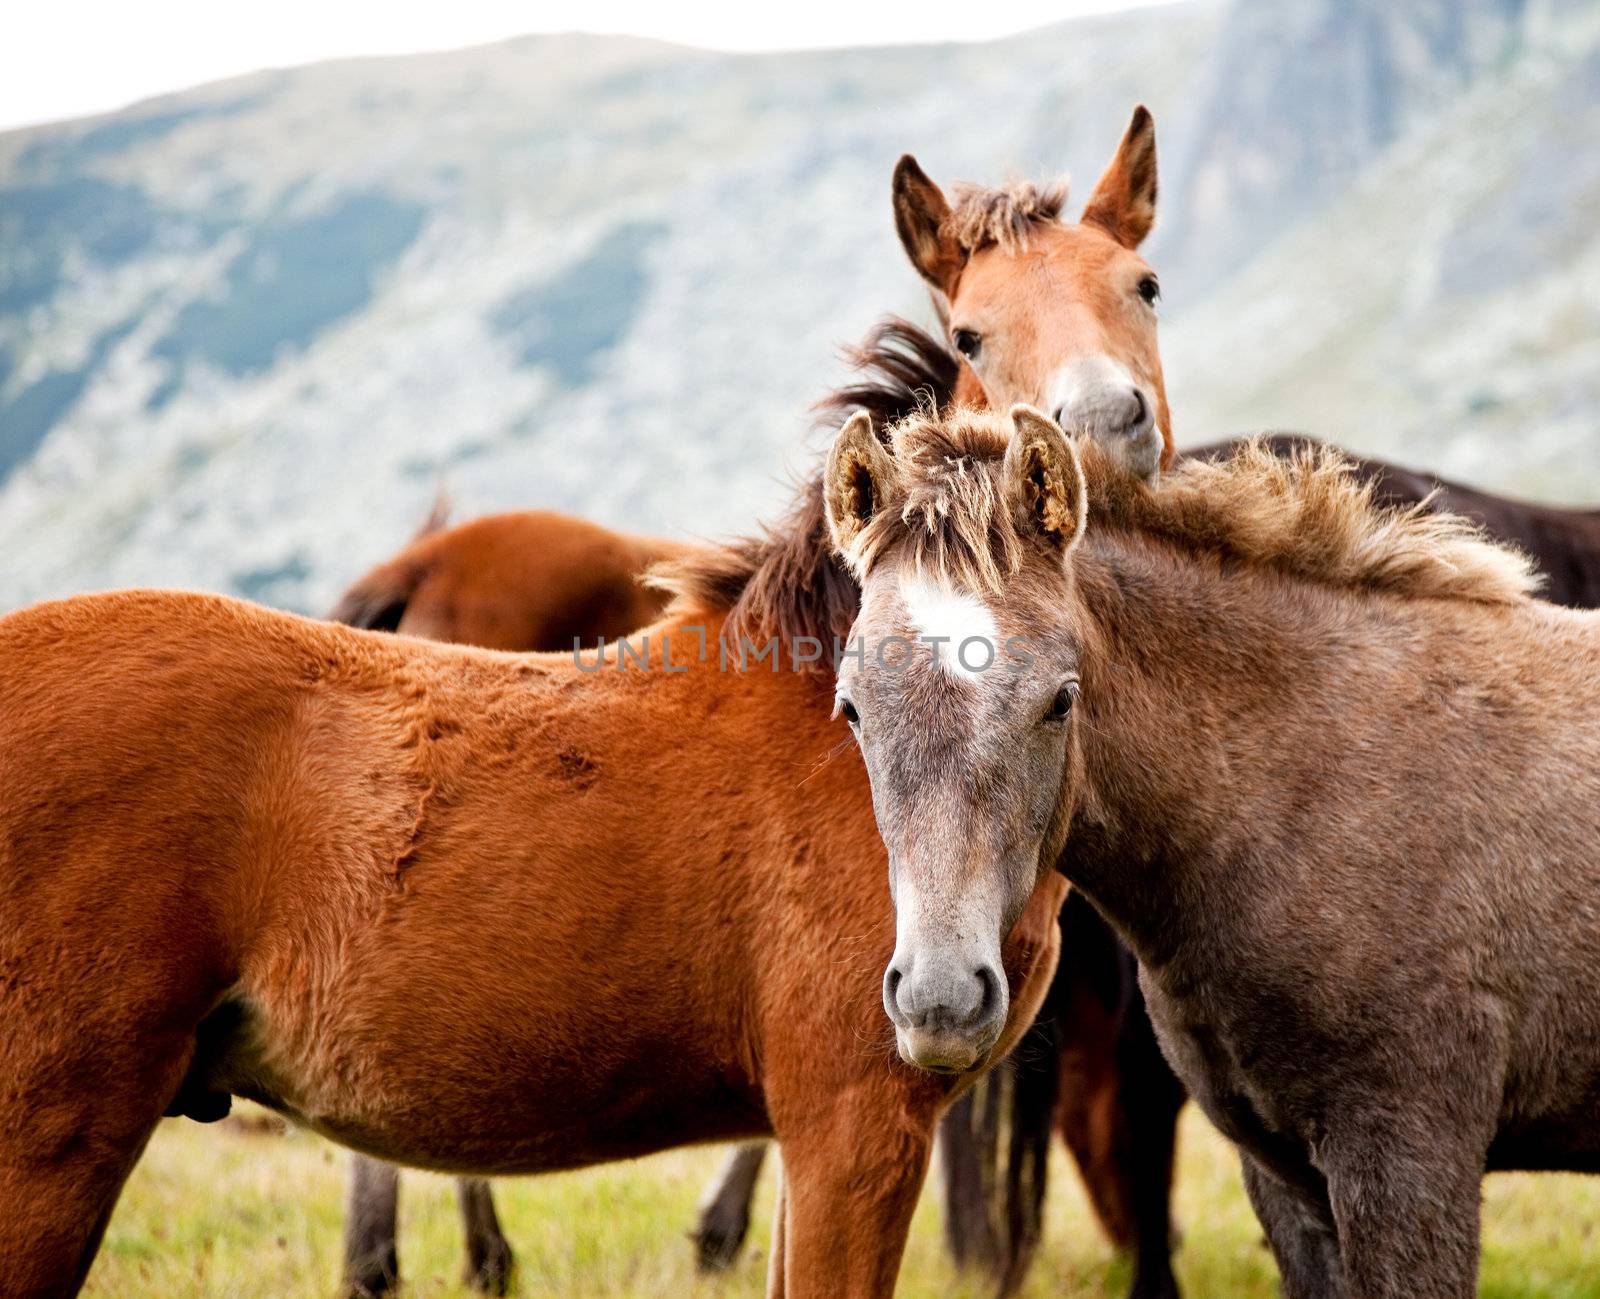 two young horses looking at camera in the mountains